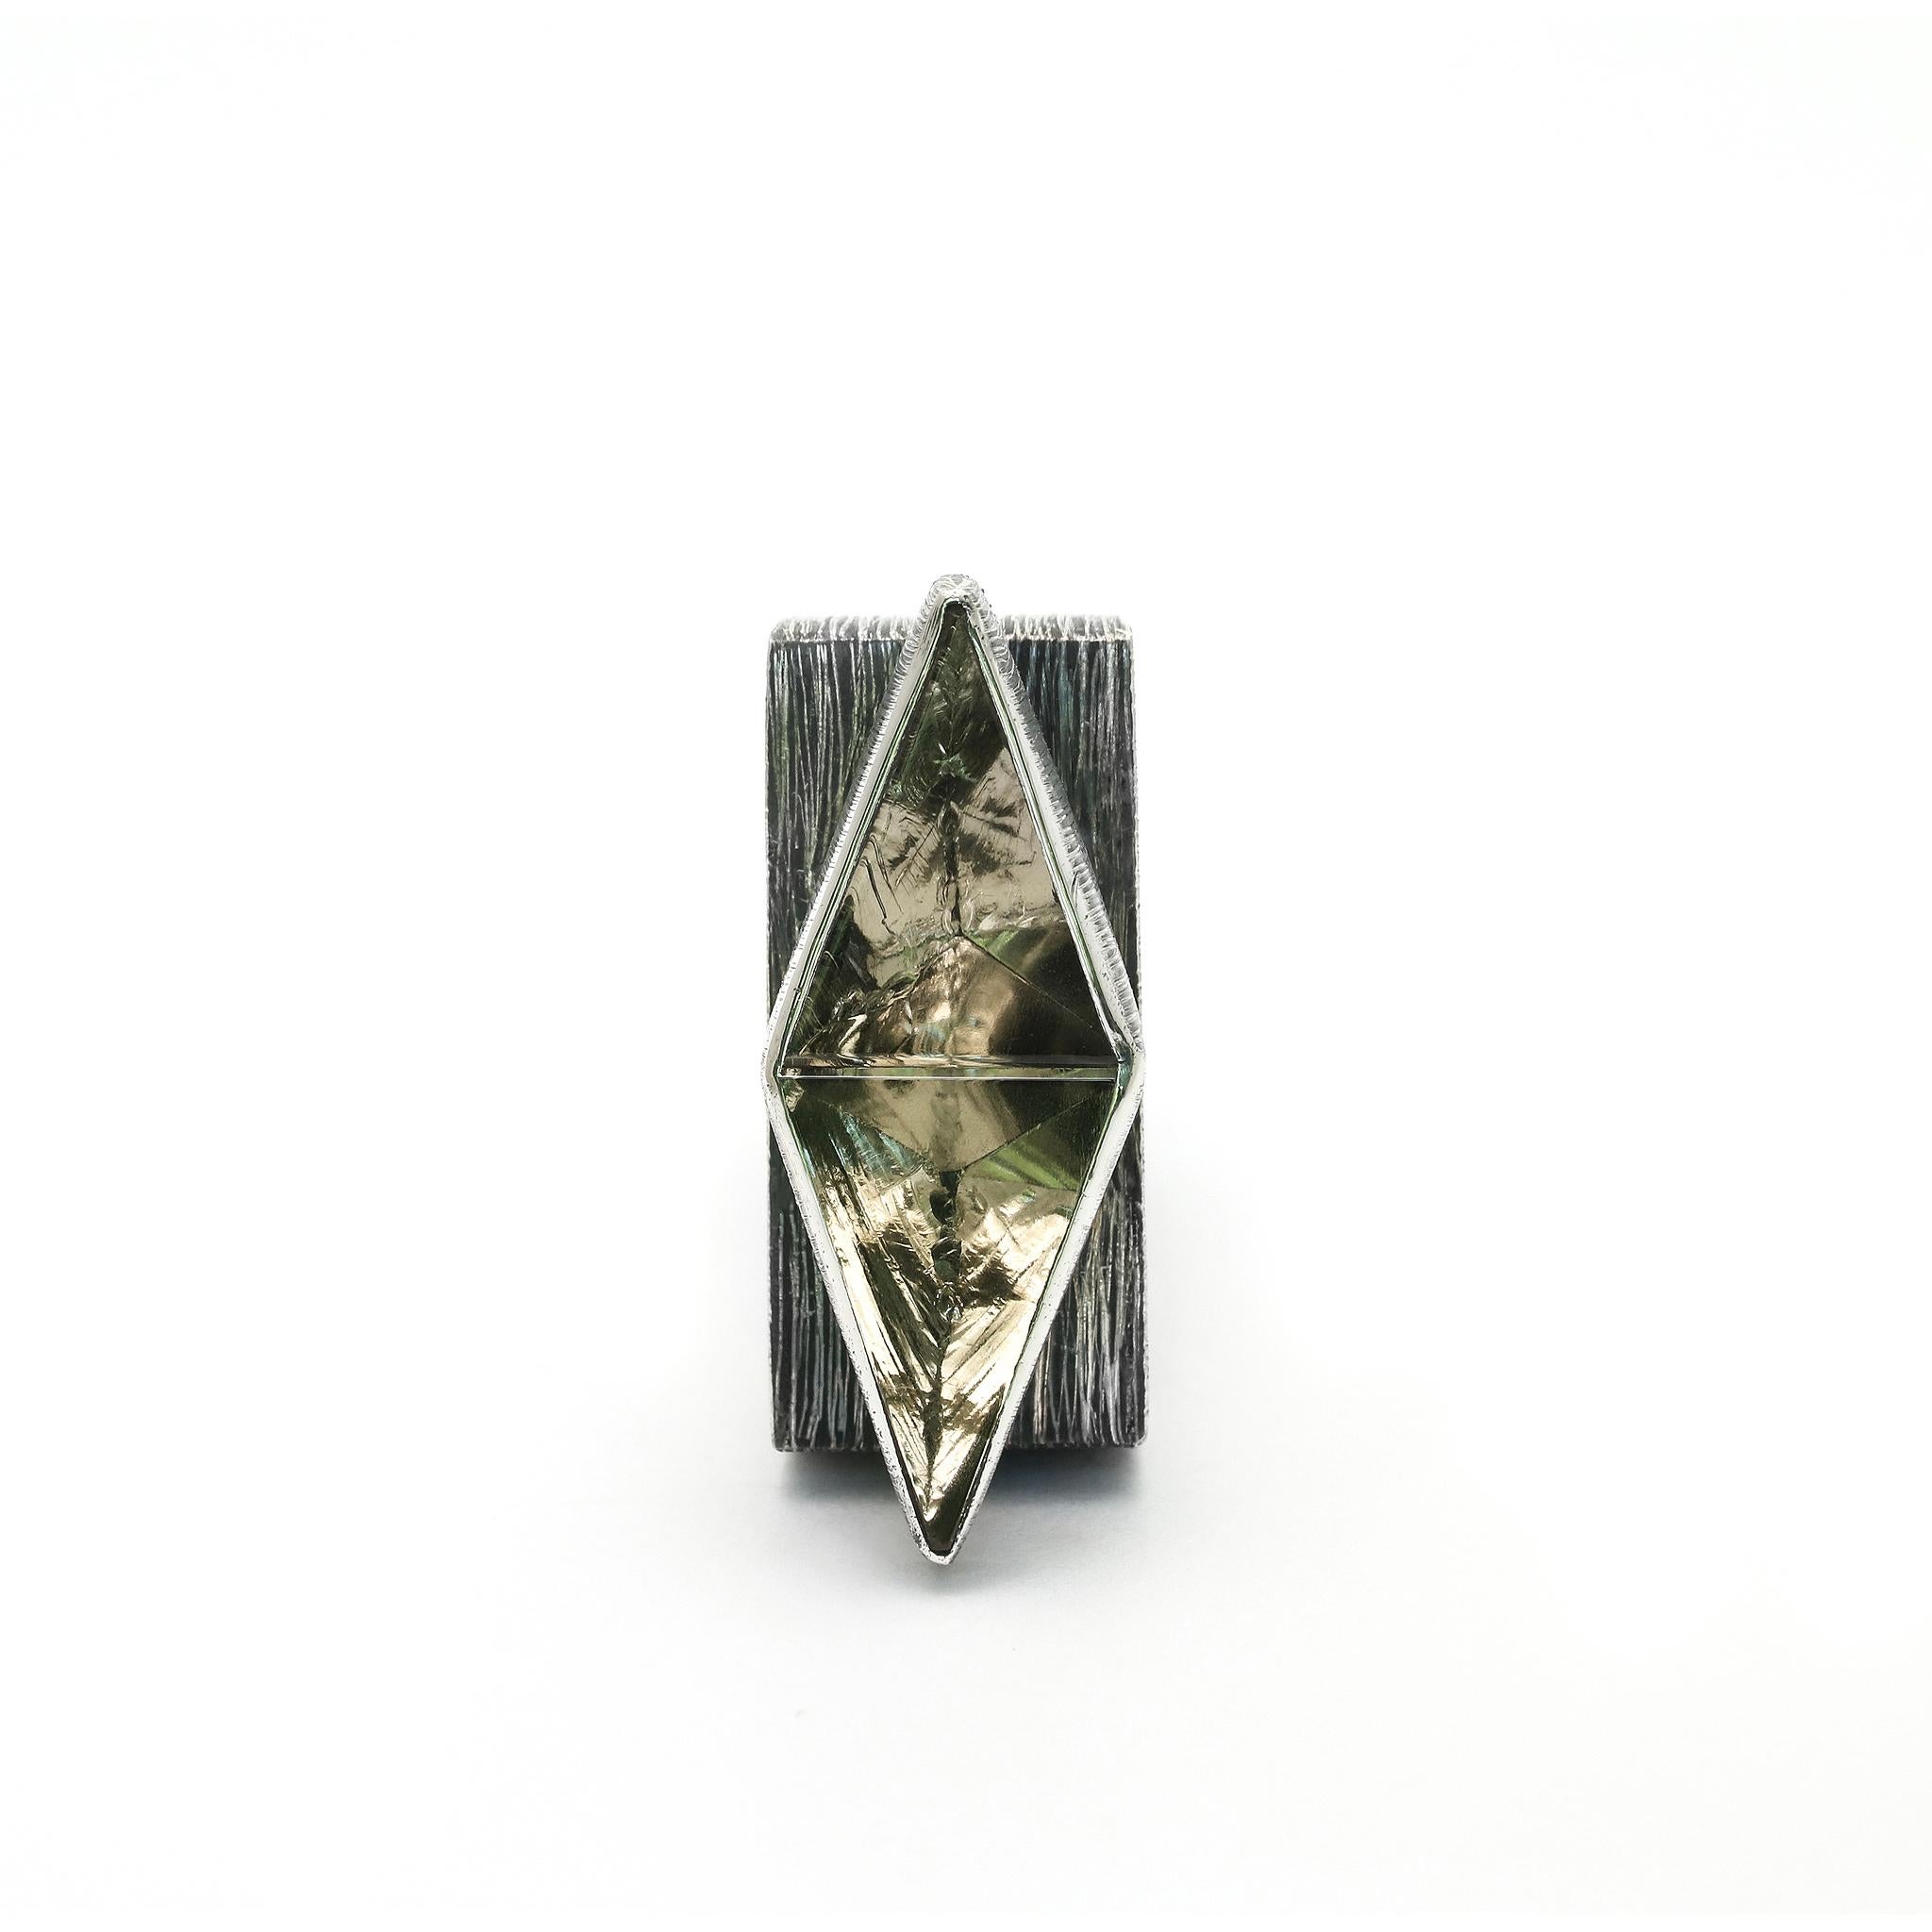 Hand-Crafted Dual Triangles Ring Crafted from Sterling Silver & Hewn Crystals